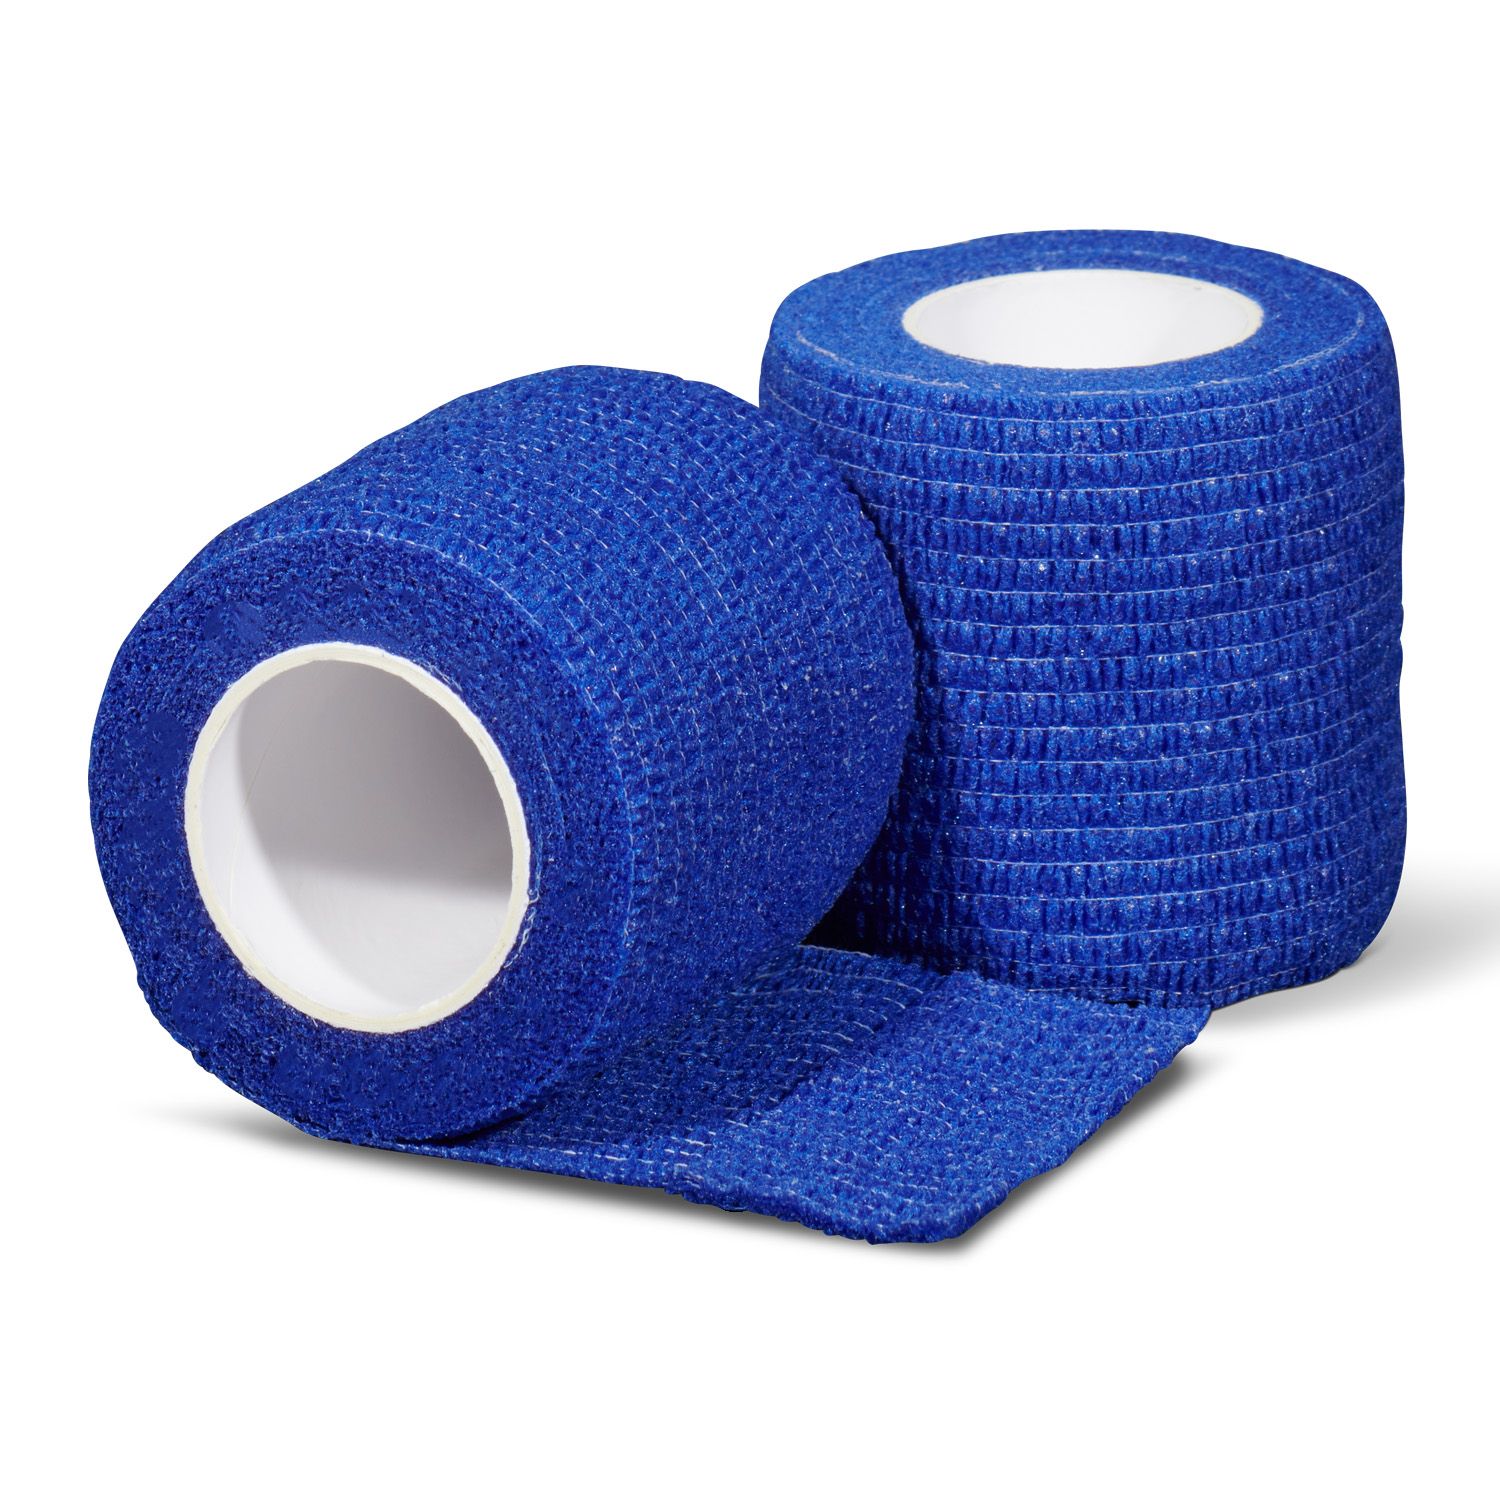 gladiator sports underwrap bandage per roll dark-blue frond and back view